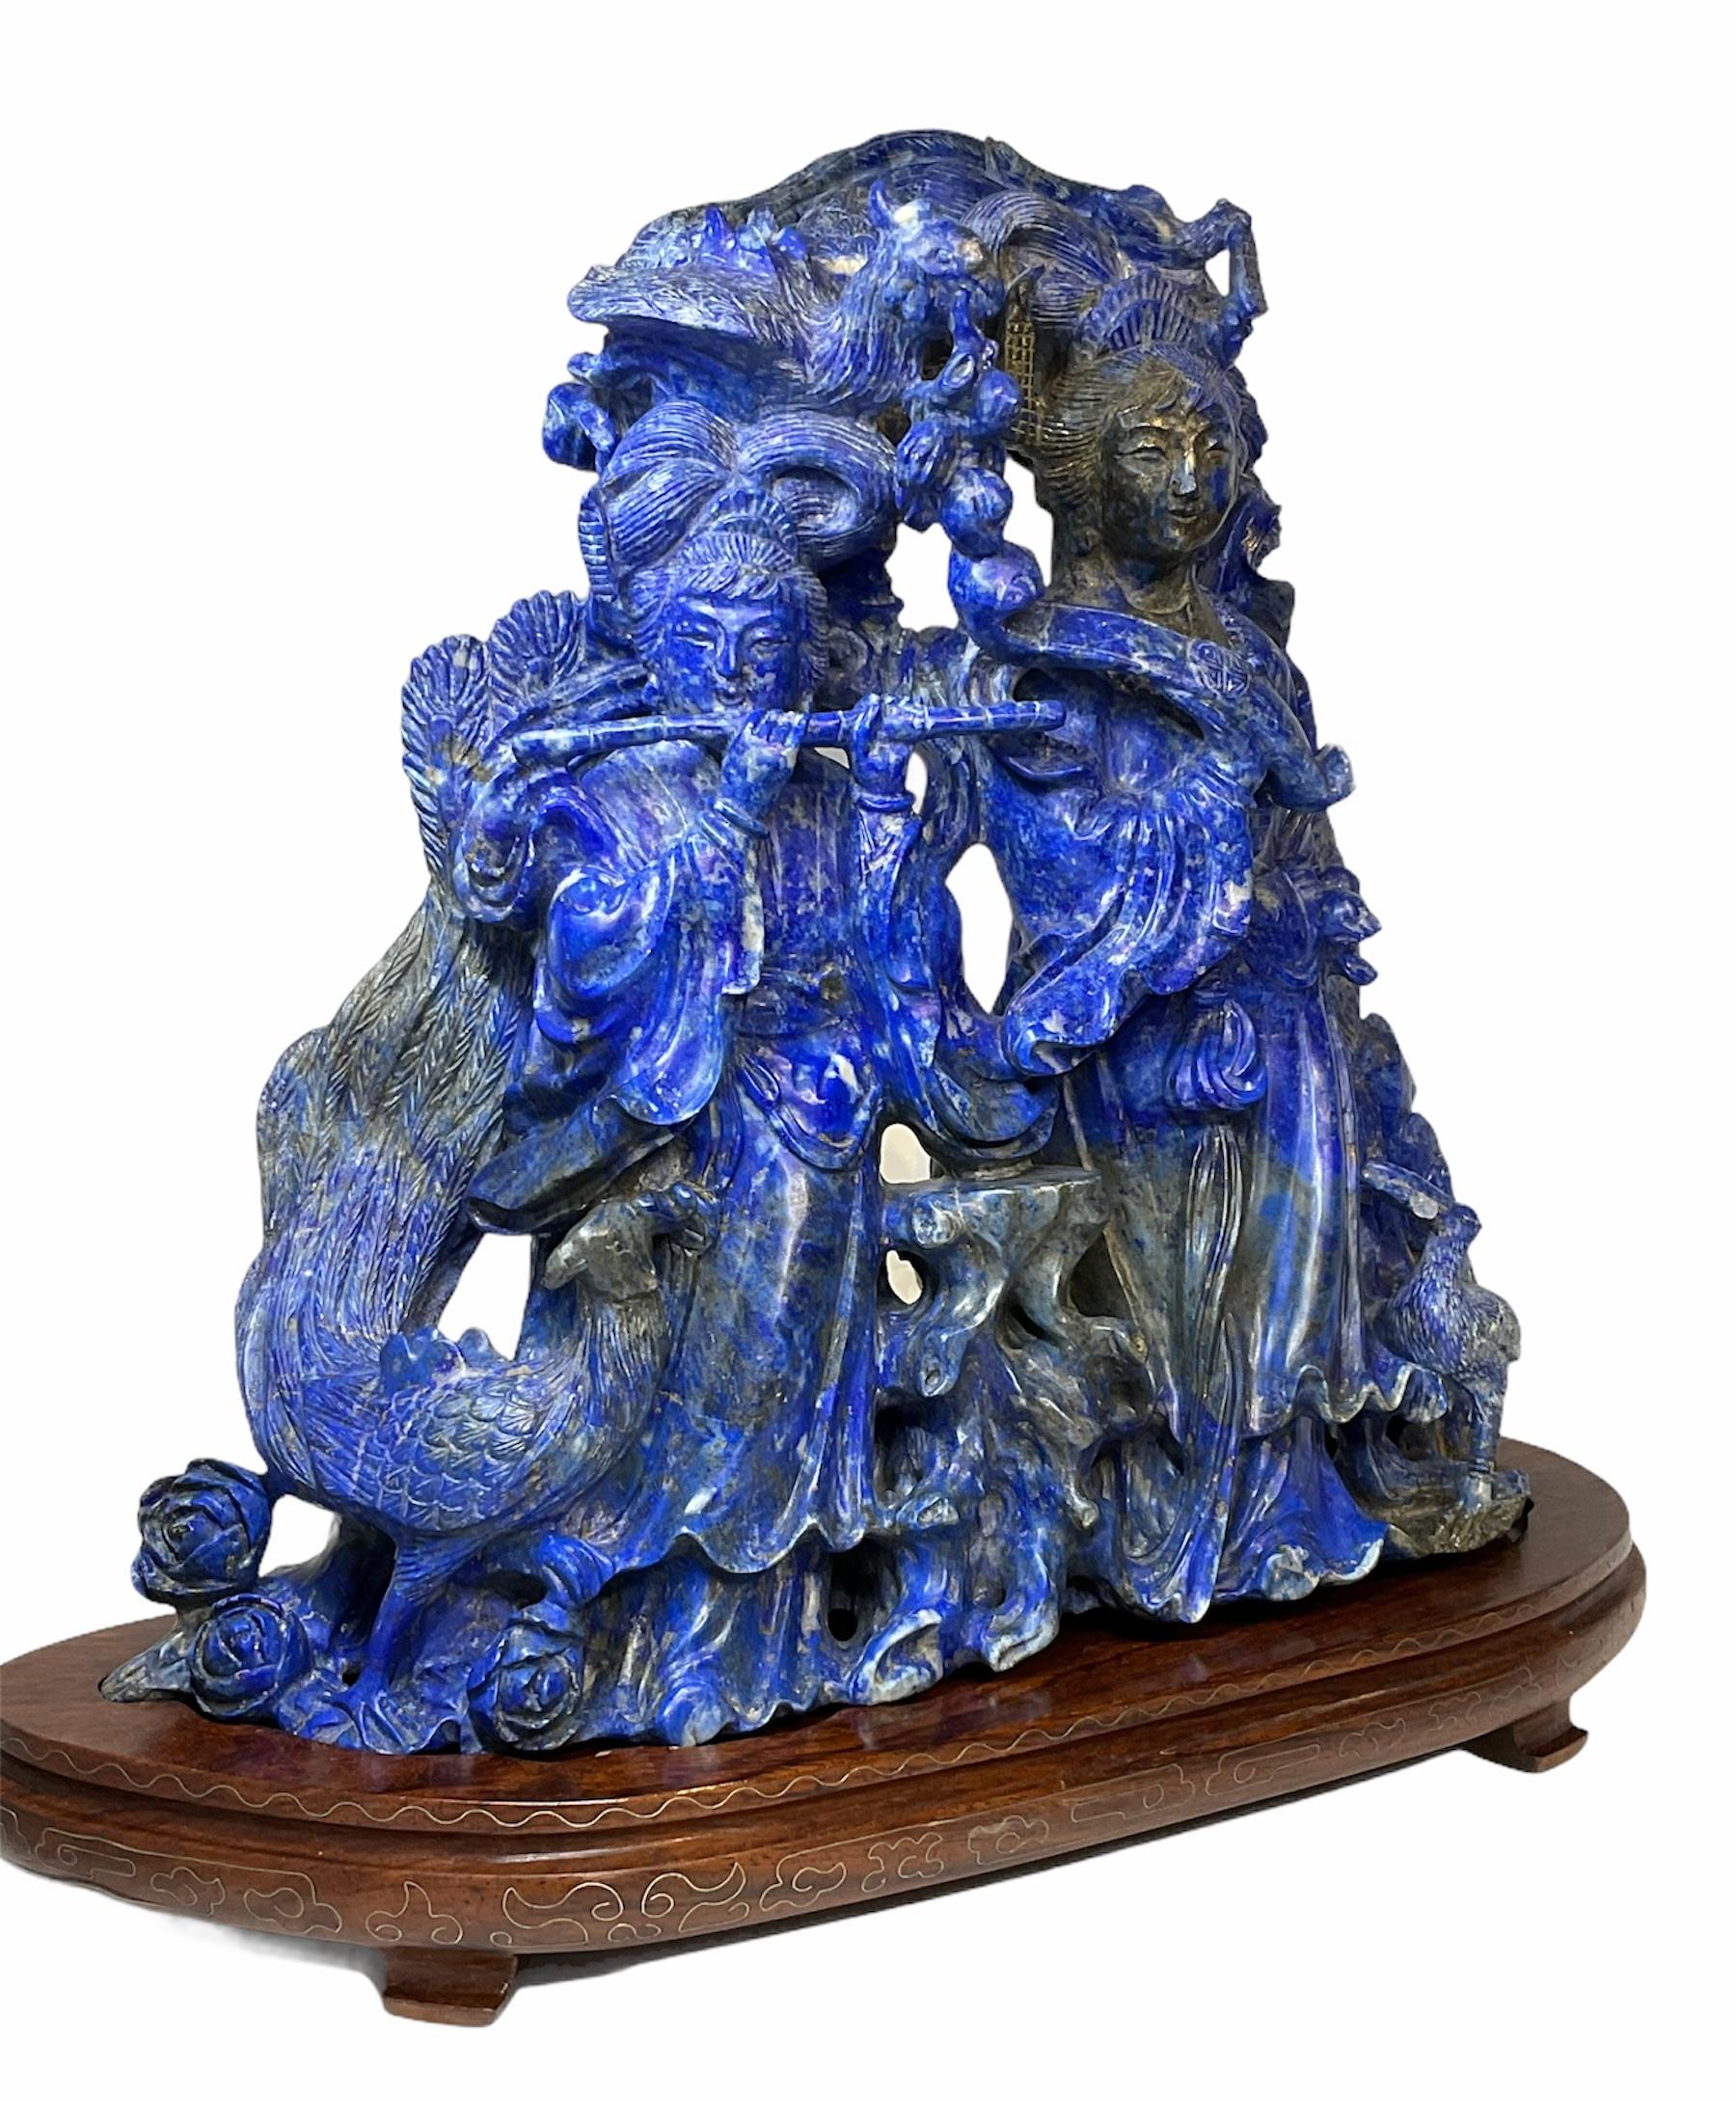 Chinese Lapis Lazuli Carved Group of Figures Sculpture For Sale 4